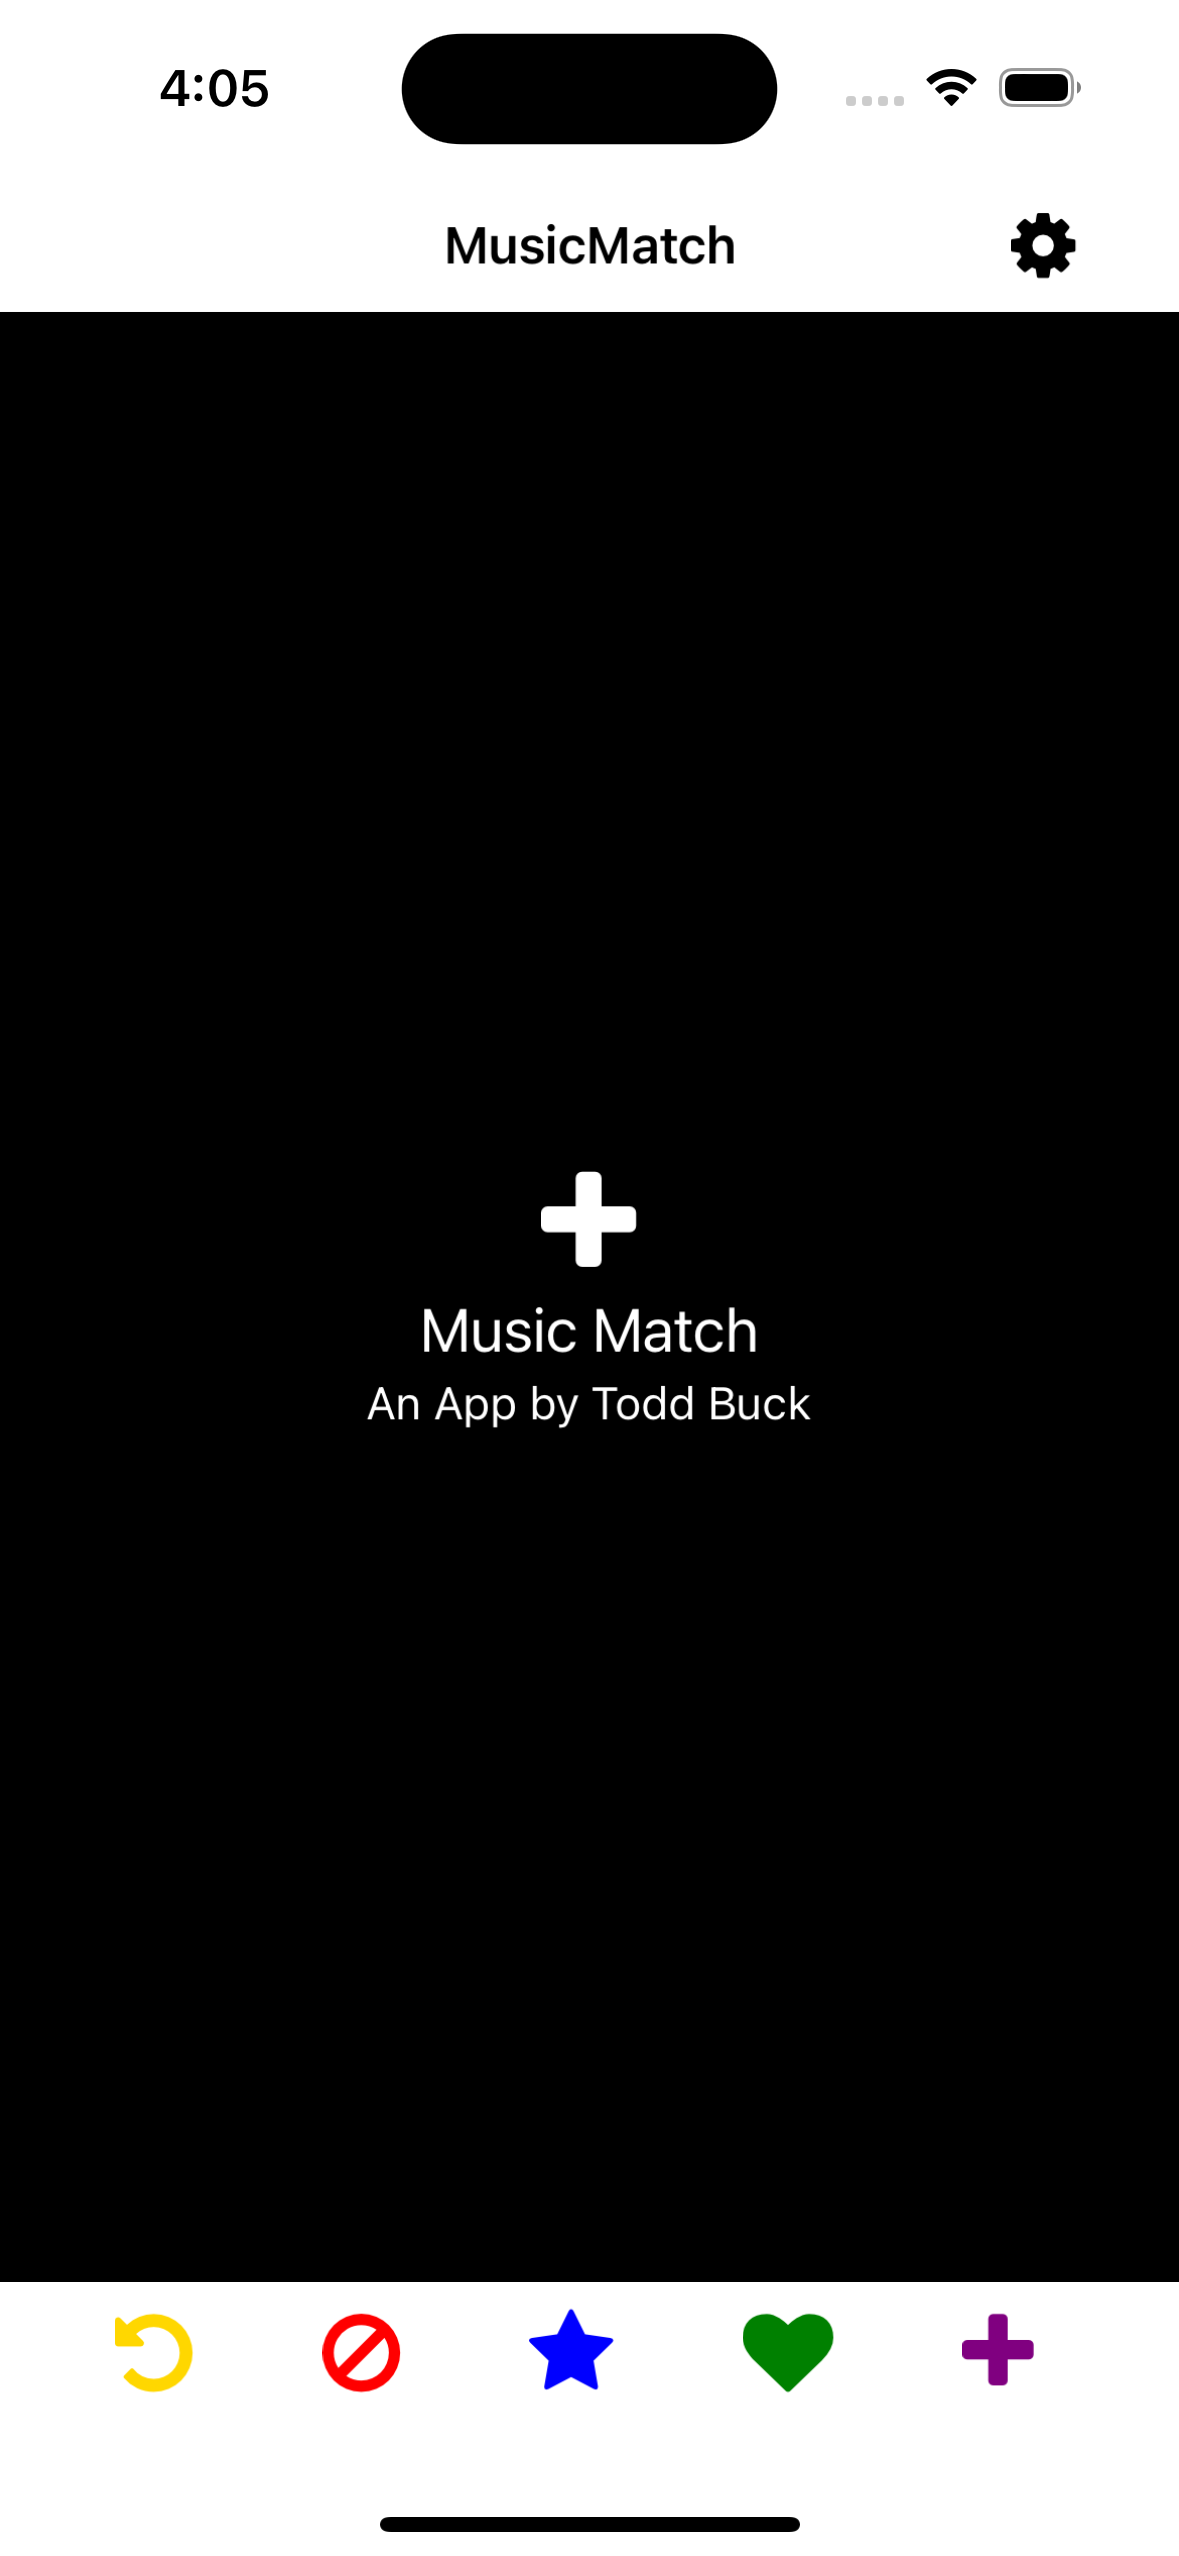 MusicMatch Front Page